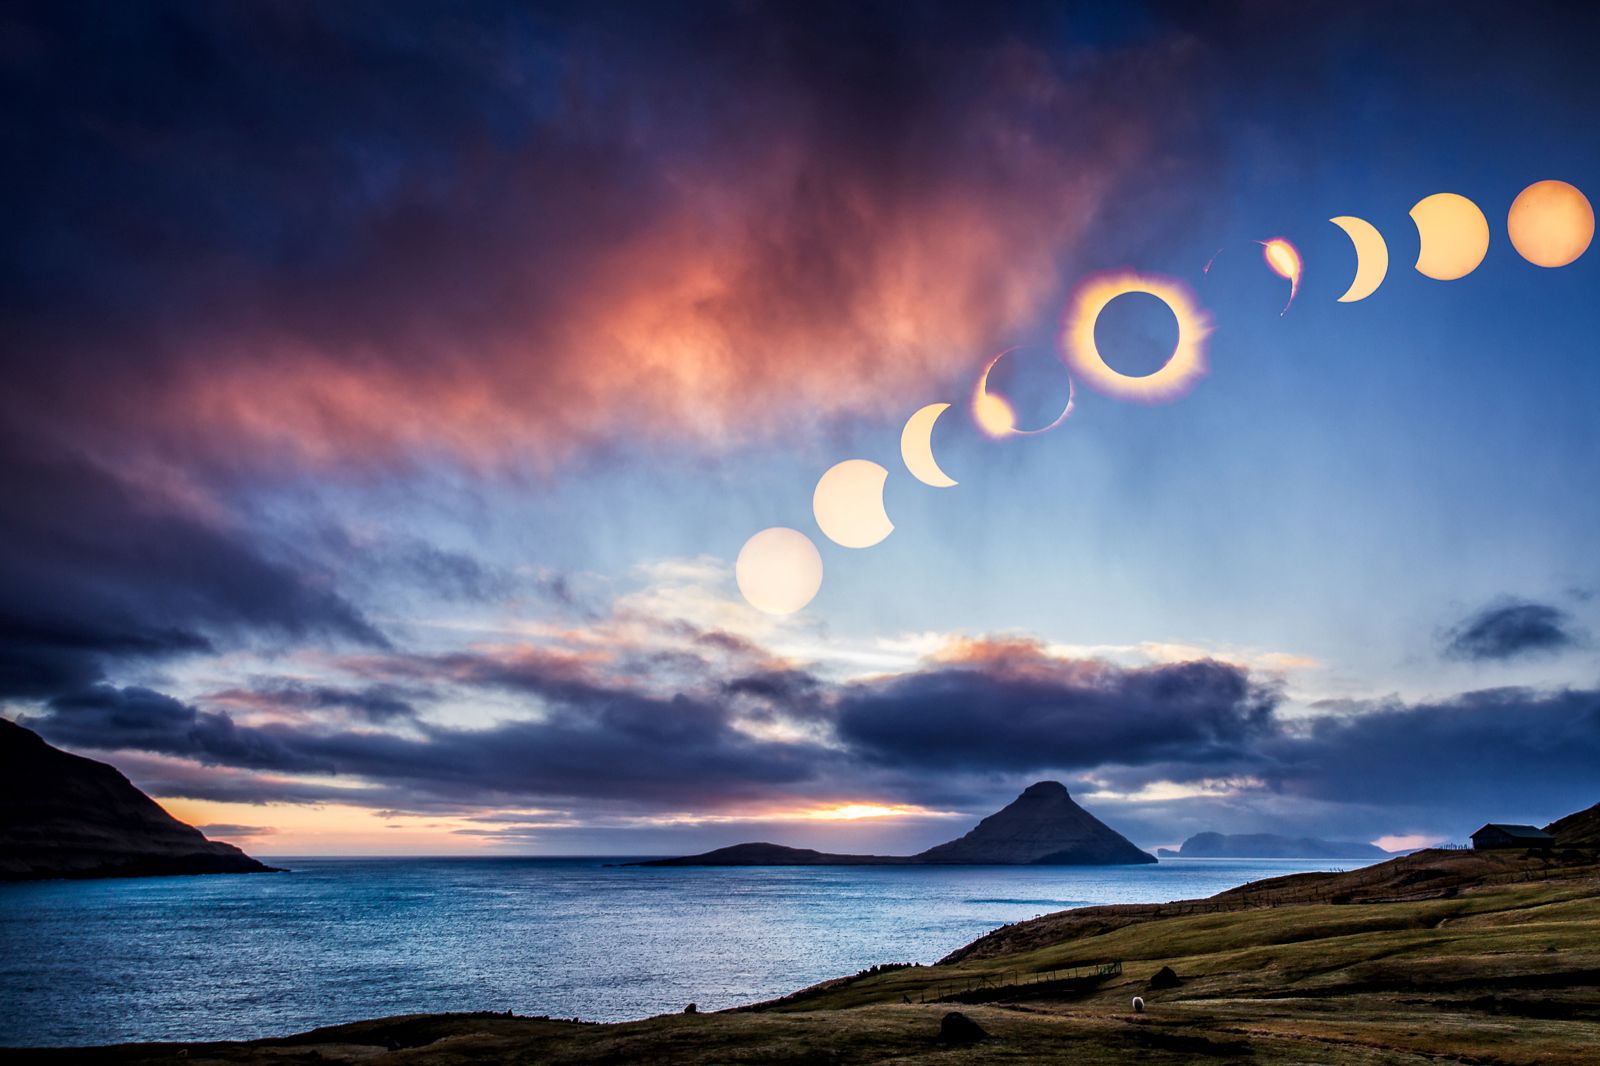 21 of the best astronomy photographs that are out of this world image 15